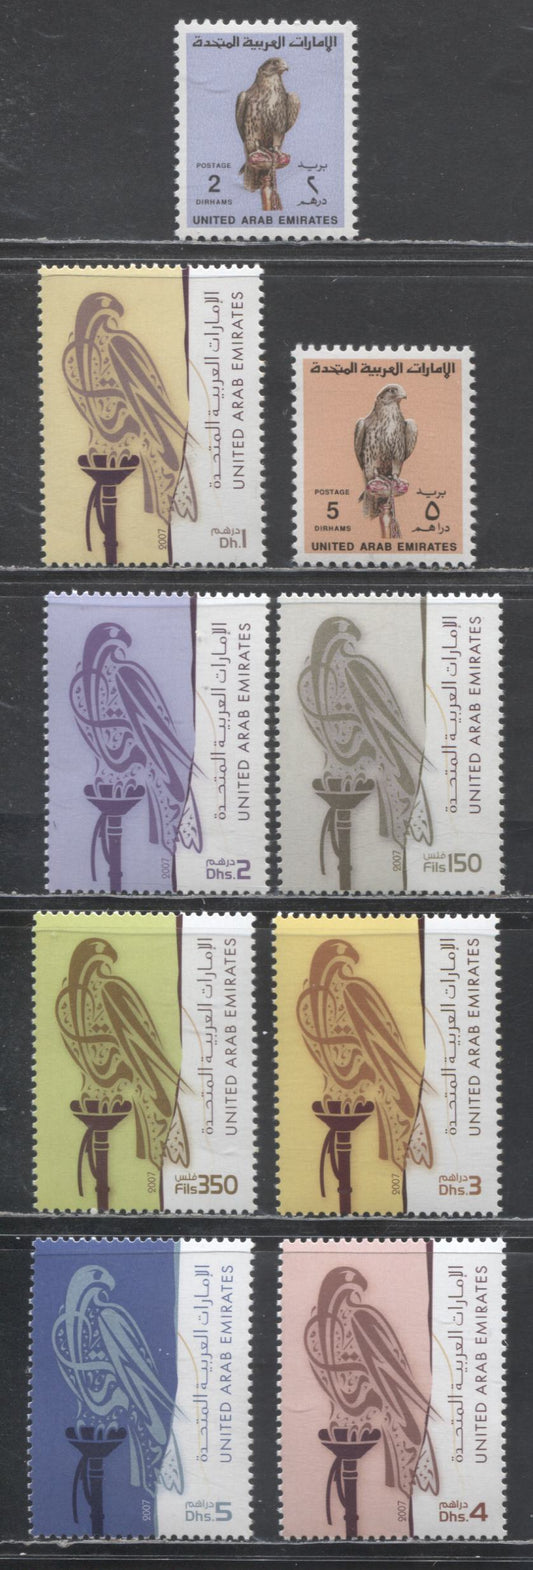 Lot 39 United Arab Emirates SC#301/865 2006-2007 Falcon Definitives - New Design Issues, 9 VFNH Singles, Click on Listing to See ALL Pictures, 2017 Scott Cat. $27.5